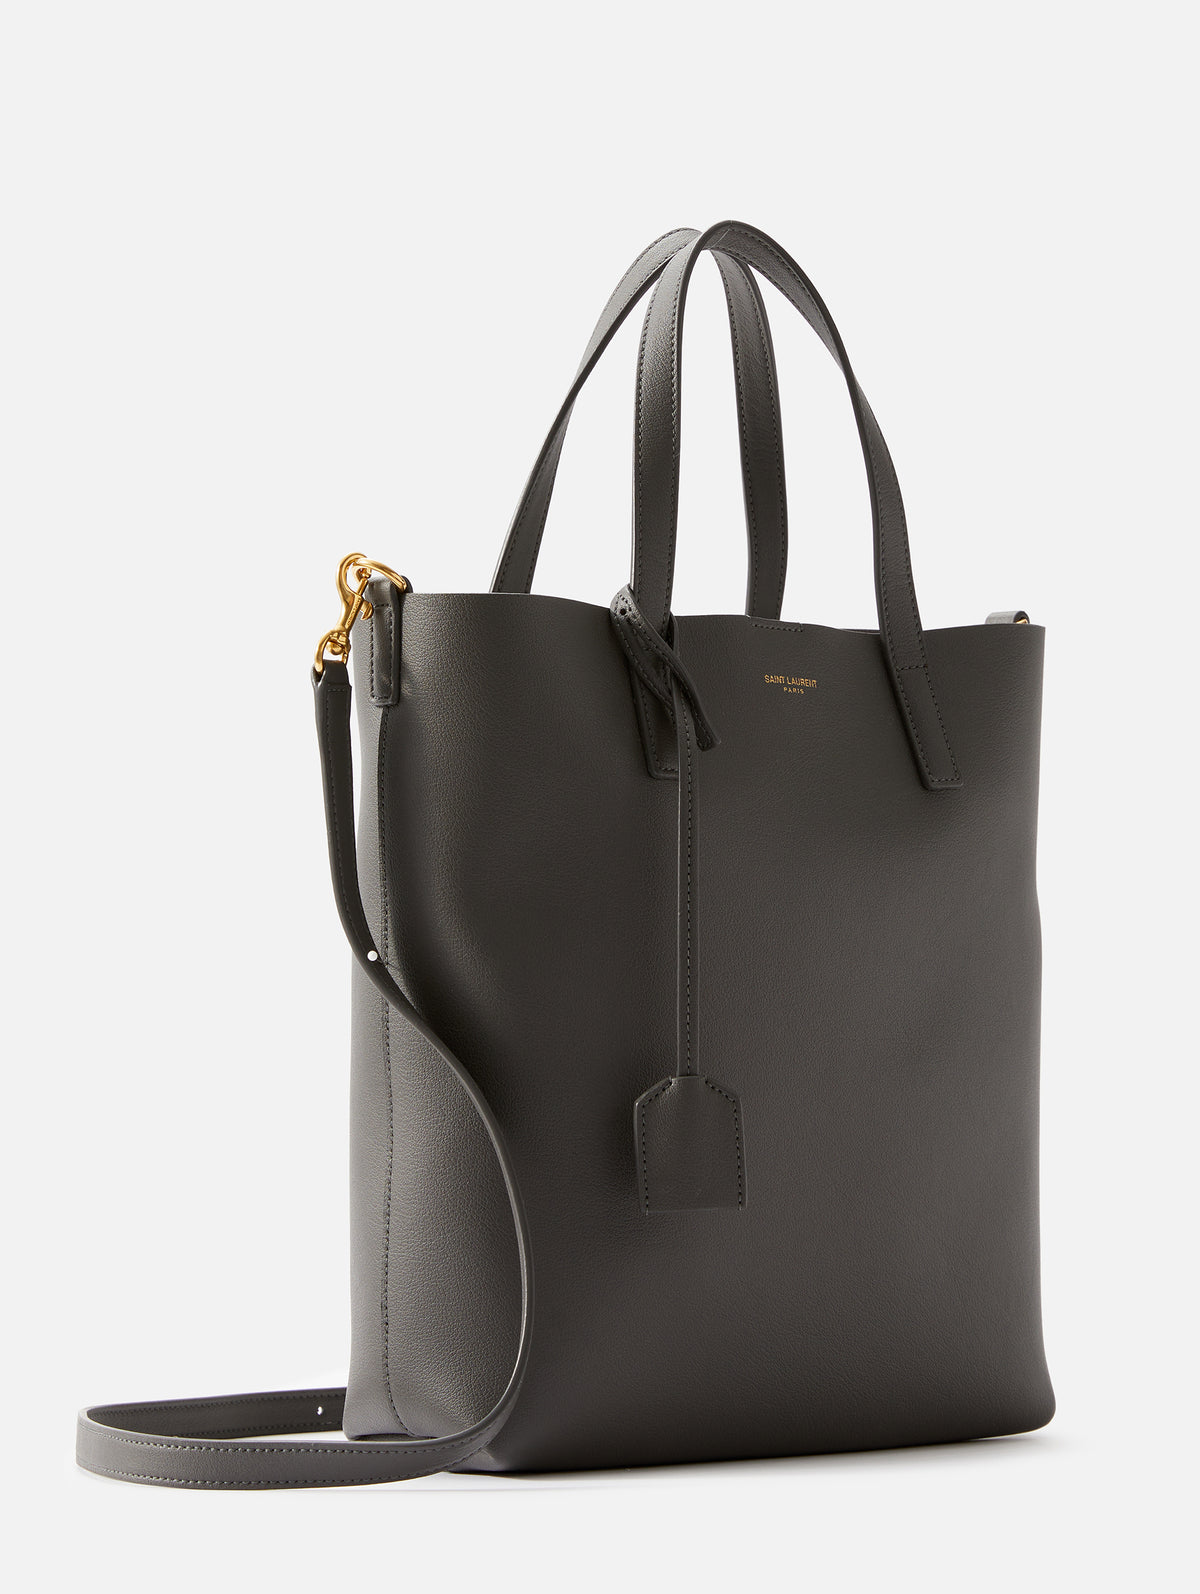 Saint Laurent North South Toy Tote